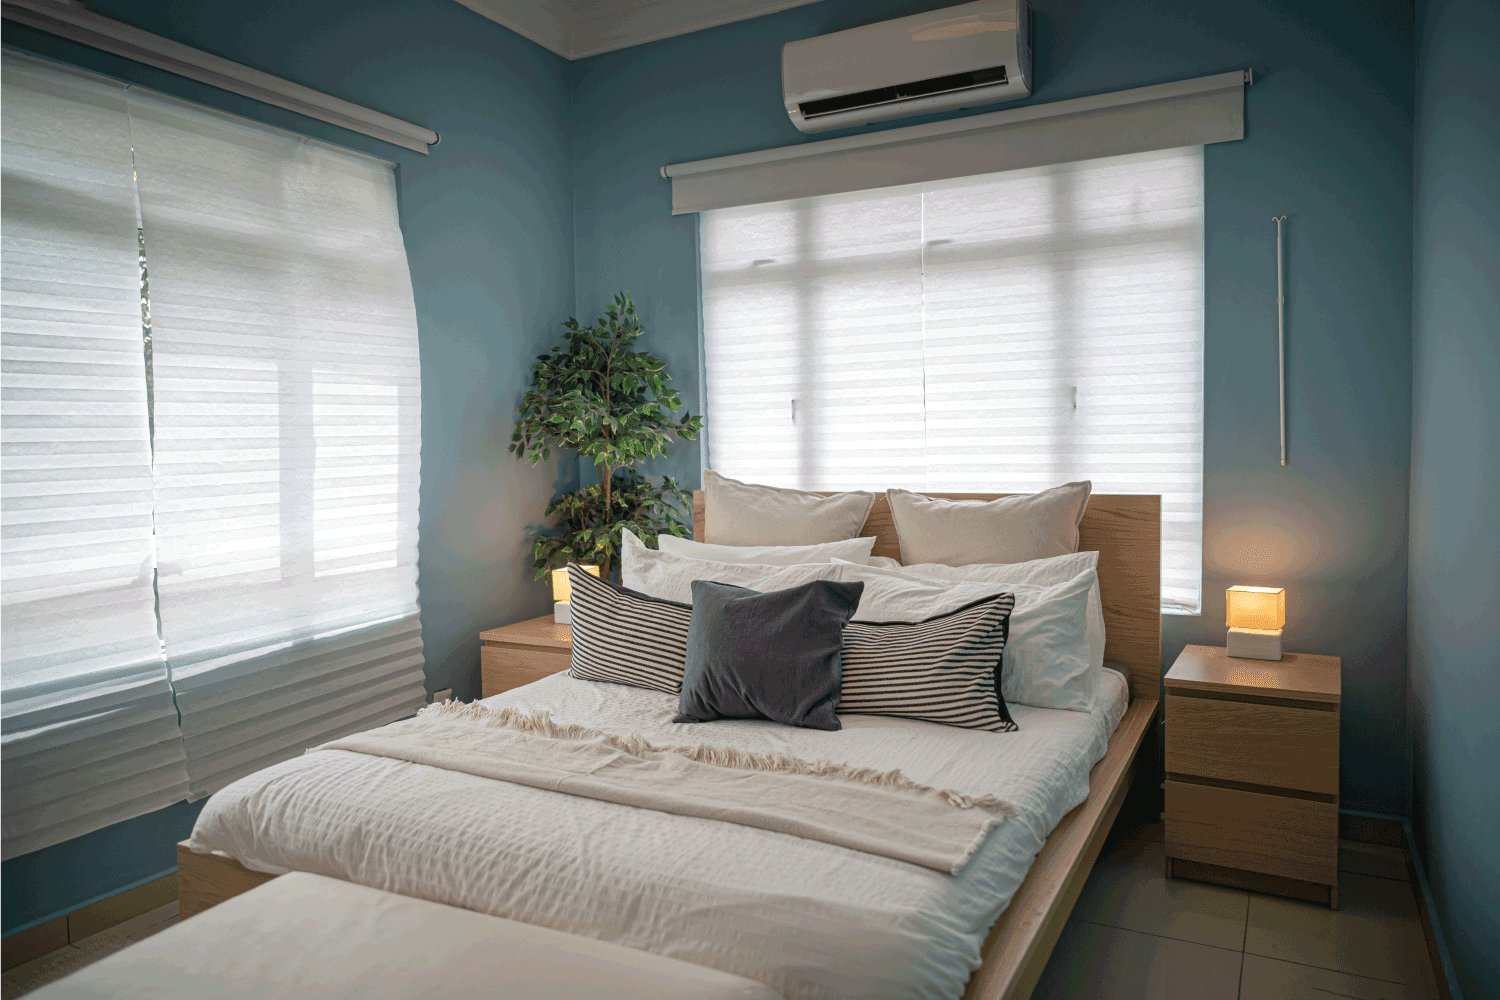 interior of a bungalow house bed room in day time without people, split type air conditioner above the window